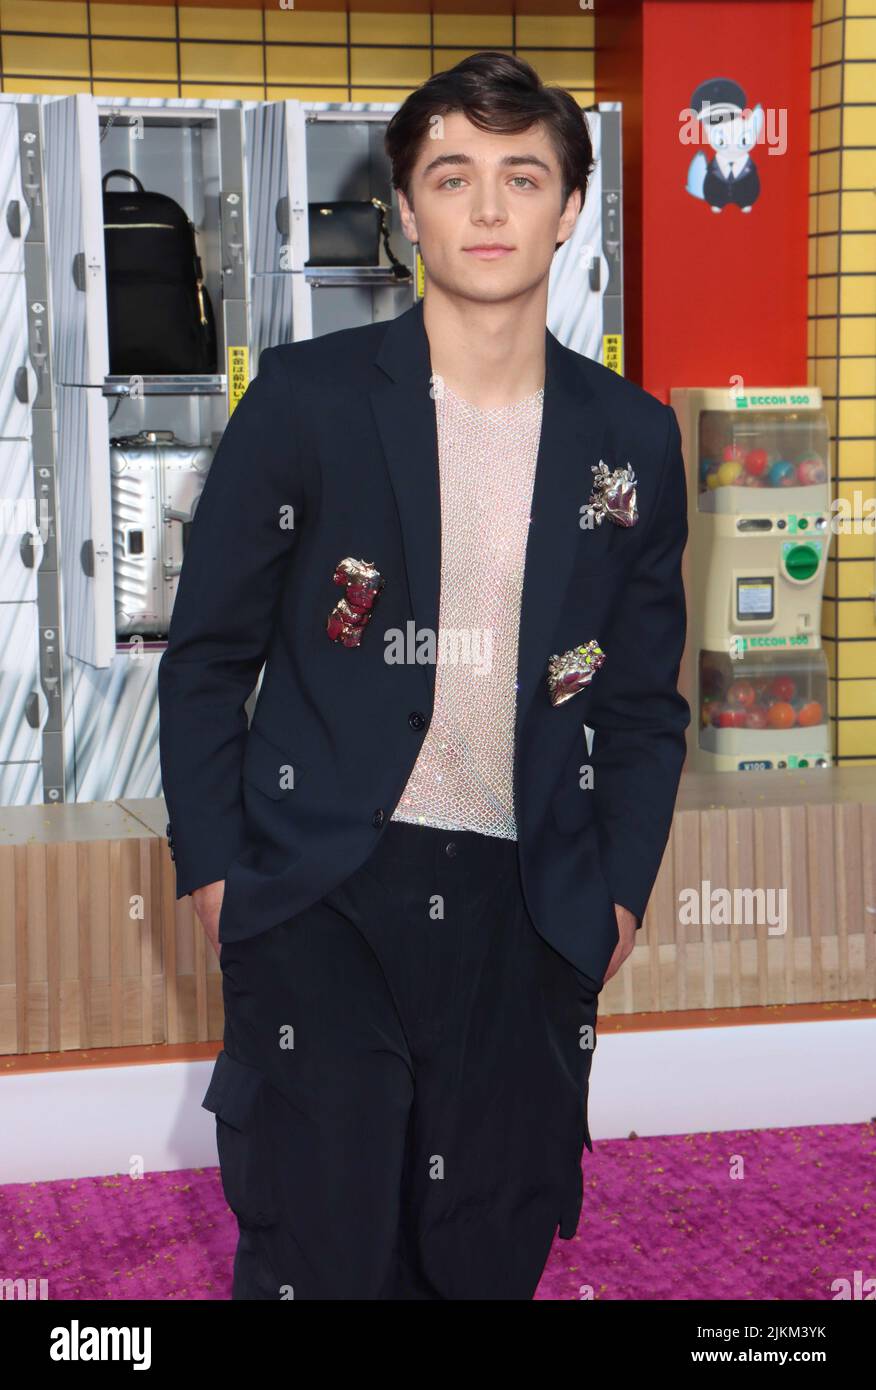 Los Angeles, USA. 02nd Aug, 2022. Asher Angel 08/01/2022 The Los Angeles Premiere of Bullet Train at the Regency Village Theatre and Regency Bruin Theatre in Los Angeles, CA Photo by Izumi Hasegawa/HollywoodNewsWire.net Credit: Hollywood News Wire Inc./Alamy Live News Stock Photo